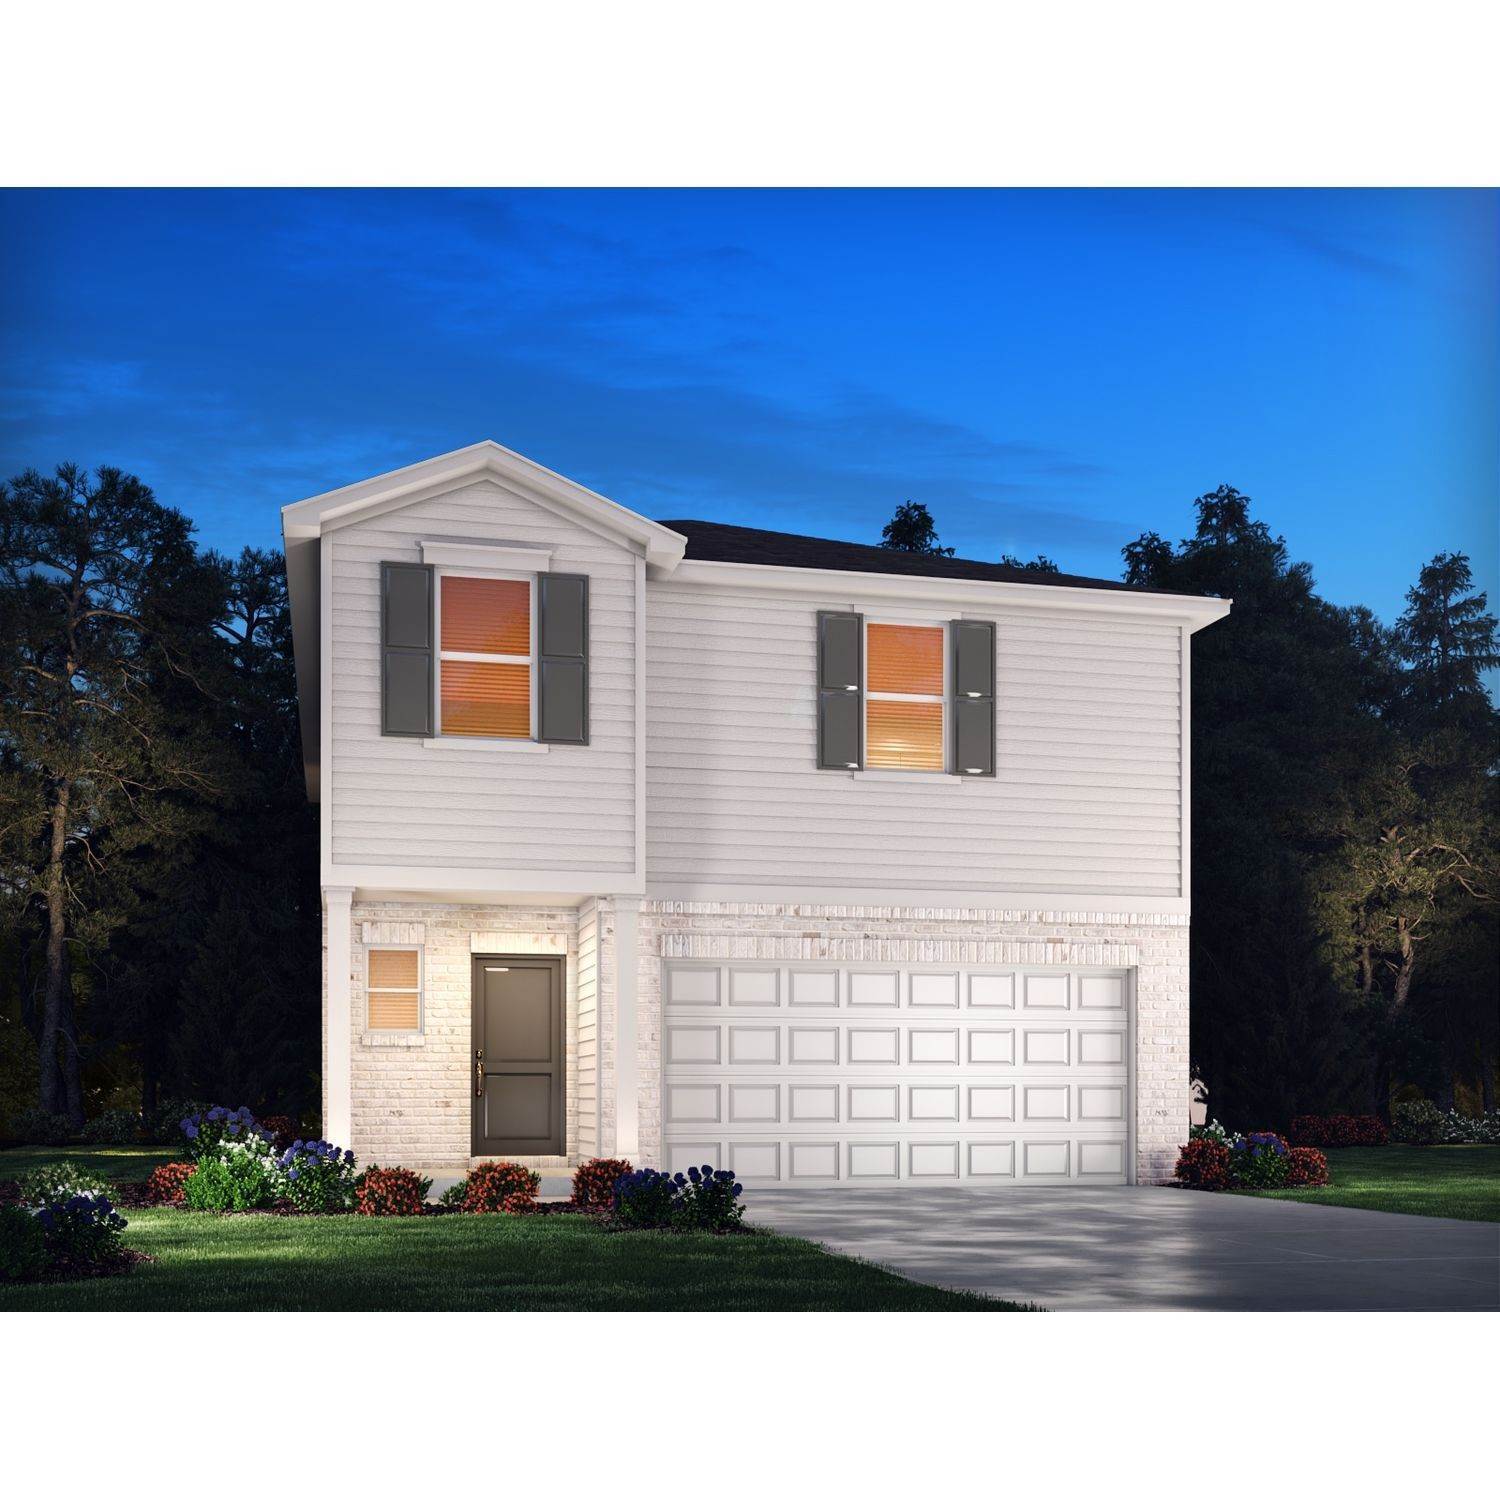 Single Family for Sale at Charlotte, NC 28216